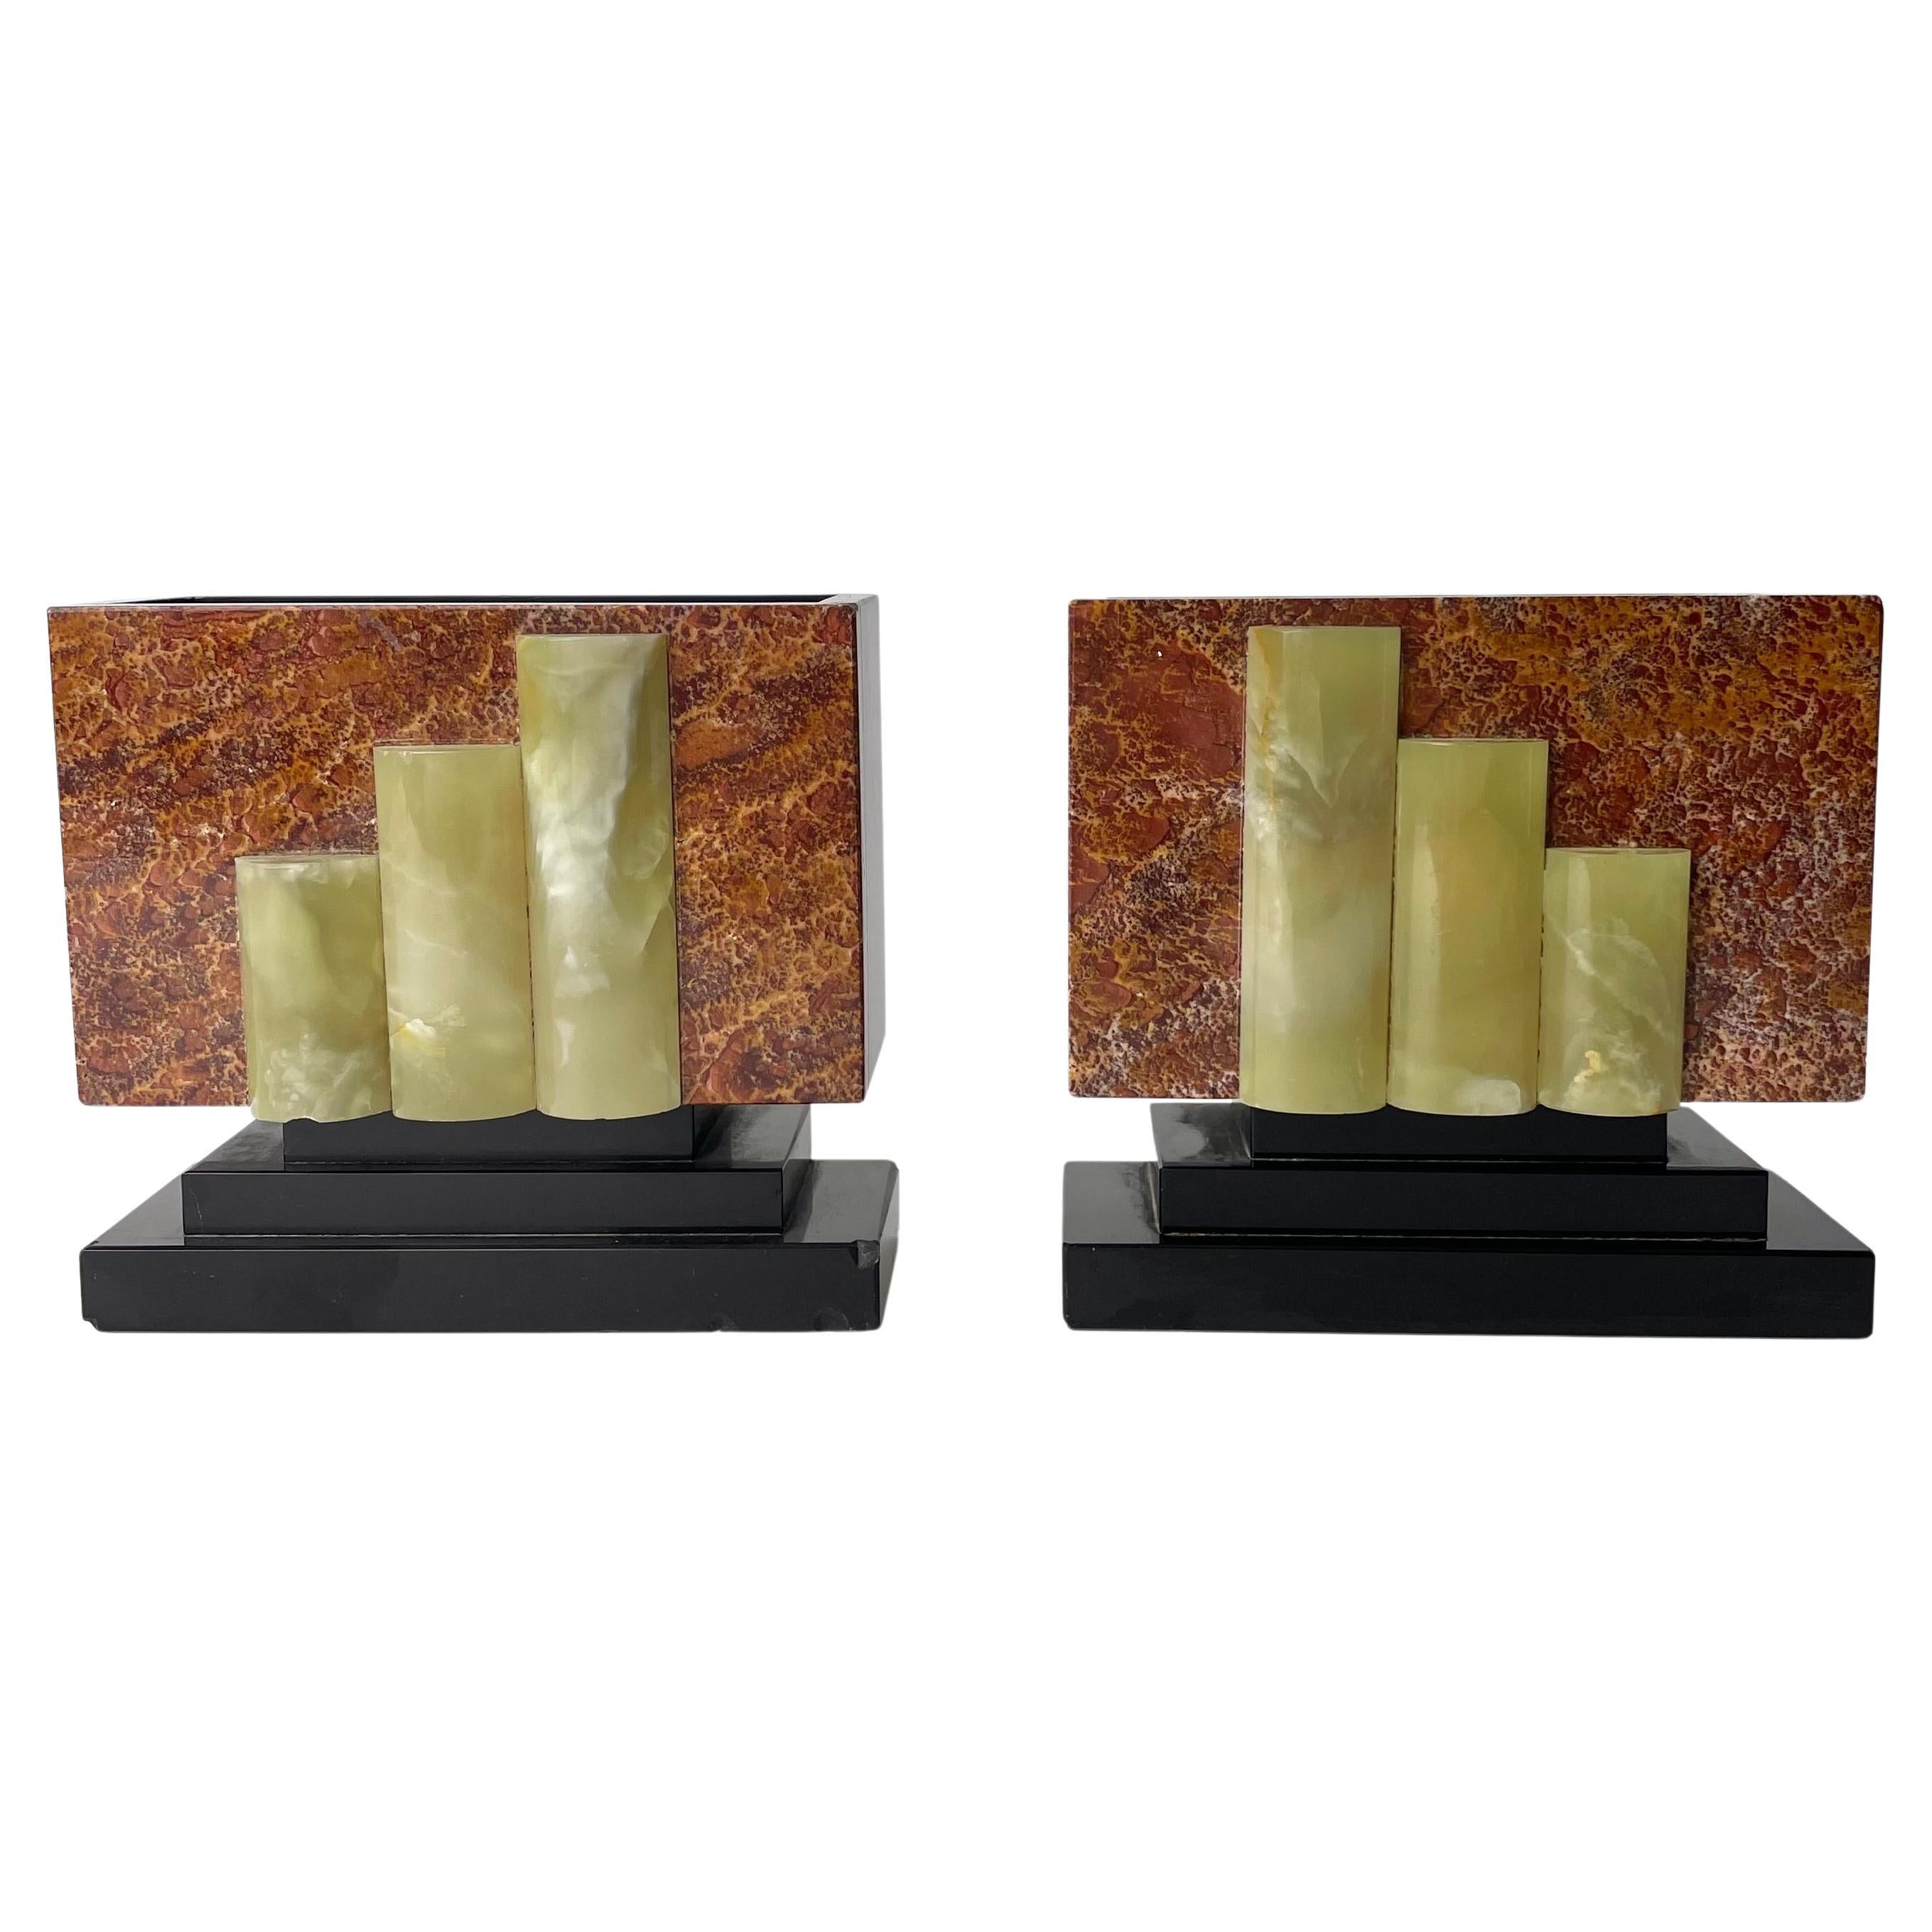 Elegant Art Deco Bookstands, Featuring 3 Marble Types, 1920s-1930s